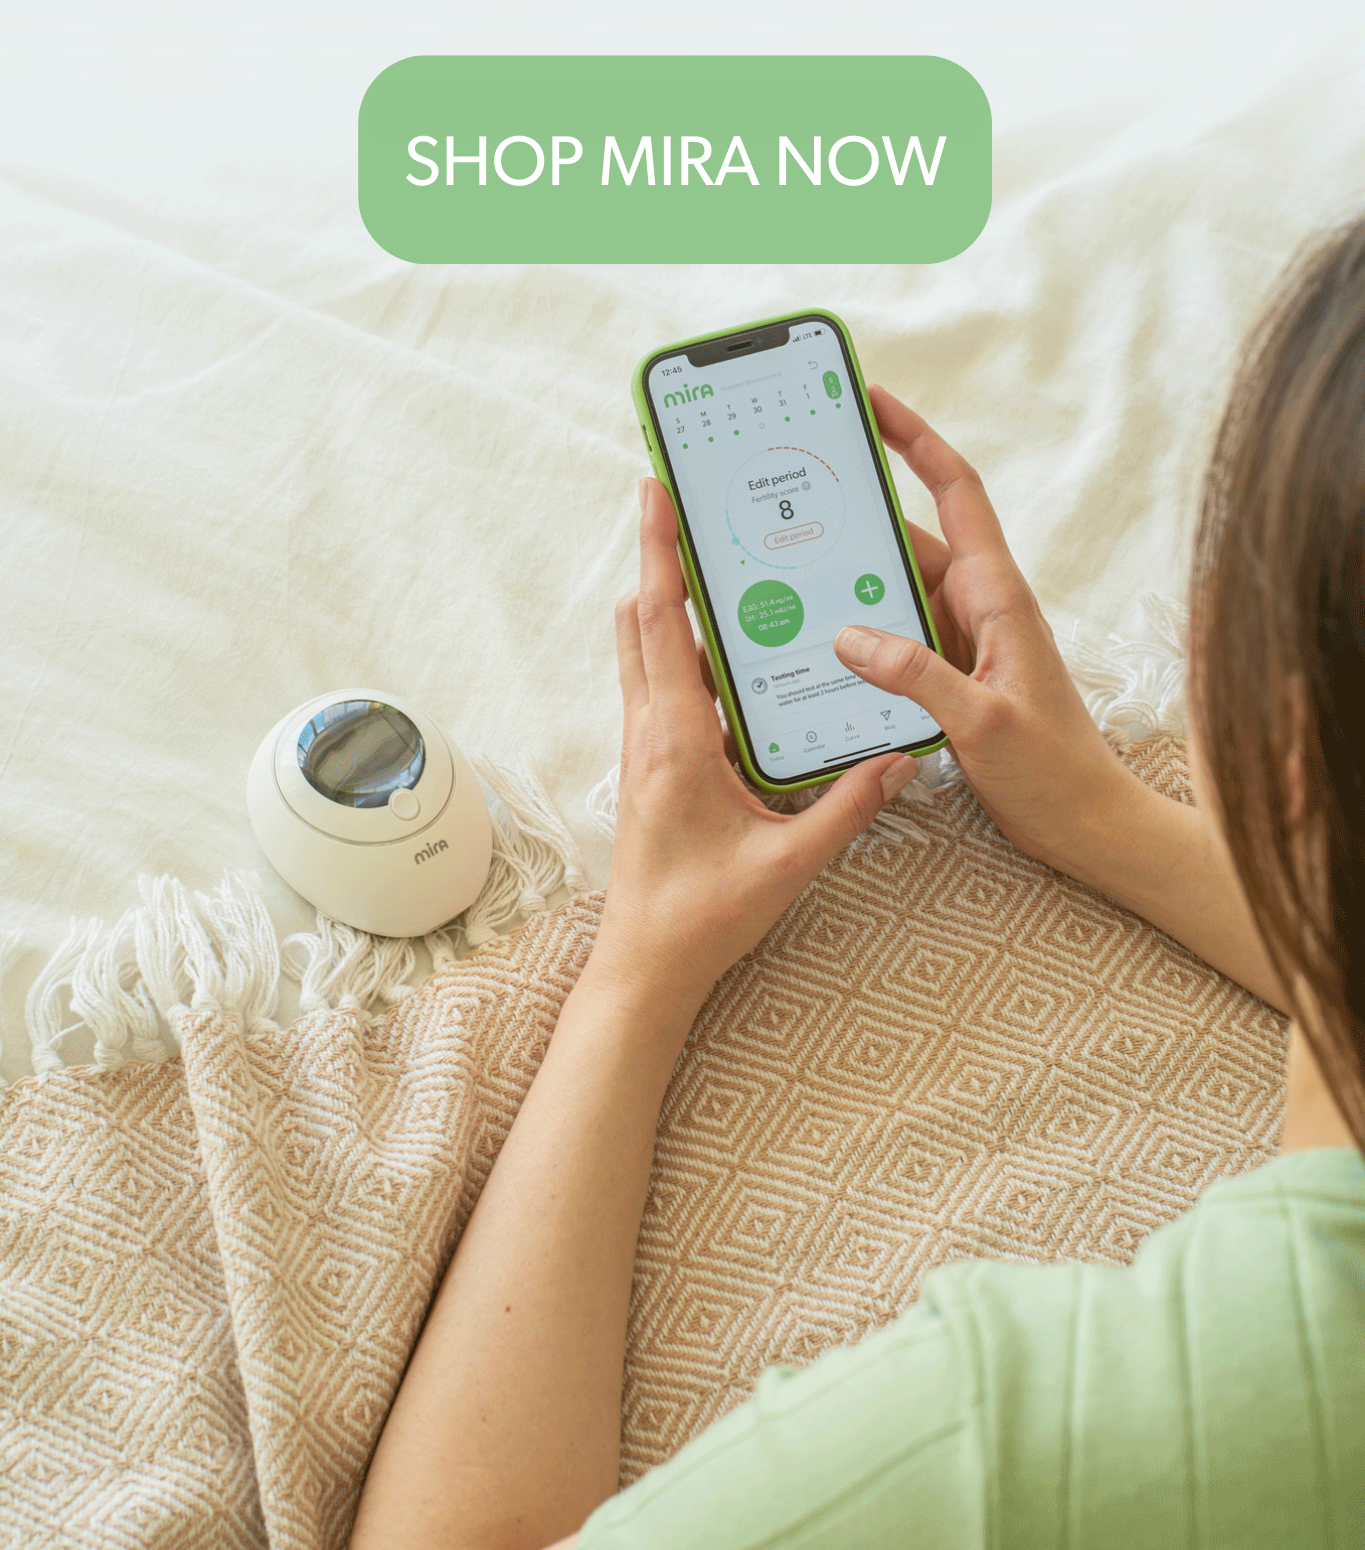 How to Purchase Mira with HSA/FSA?